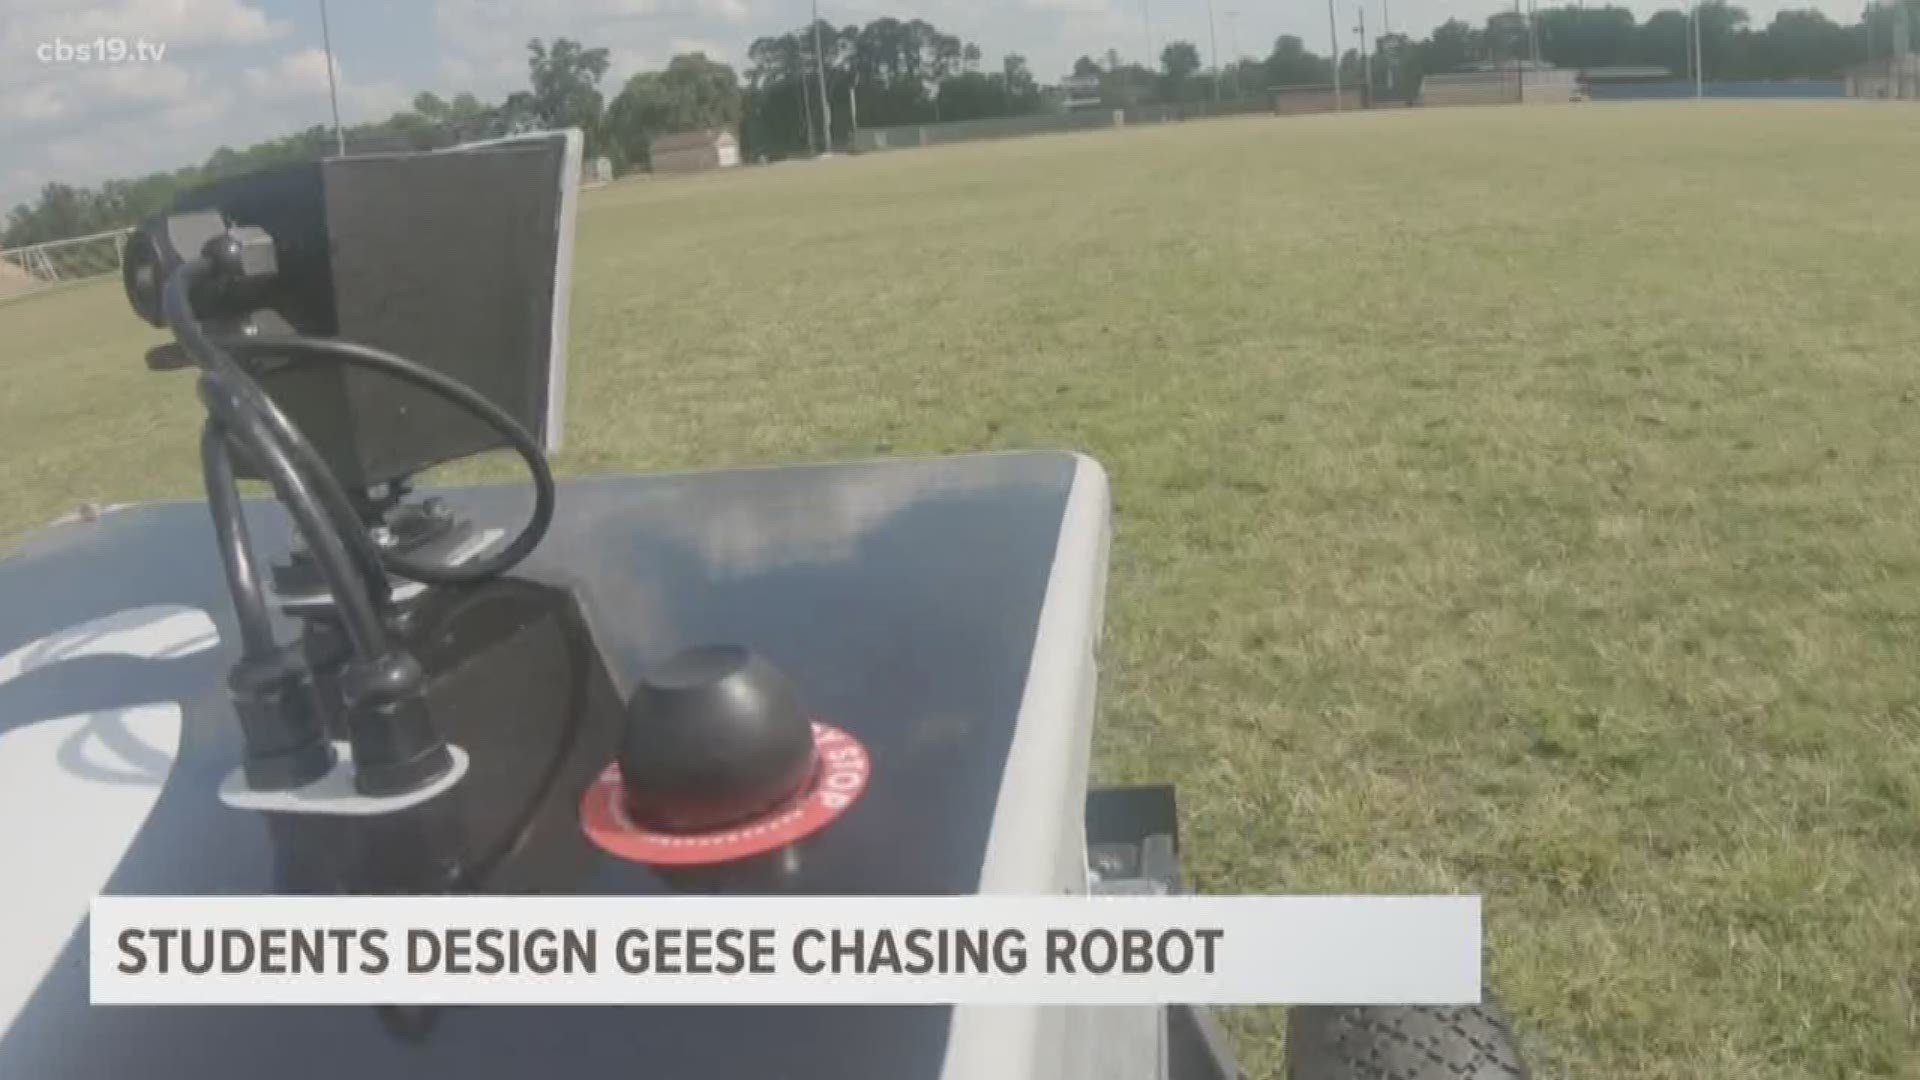 Geese, golf and robots are three words one would likely never use in the same sentence. However, some inventive students came up with a creative solution for a oddly common problem.